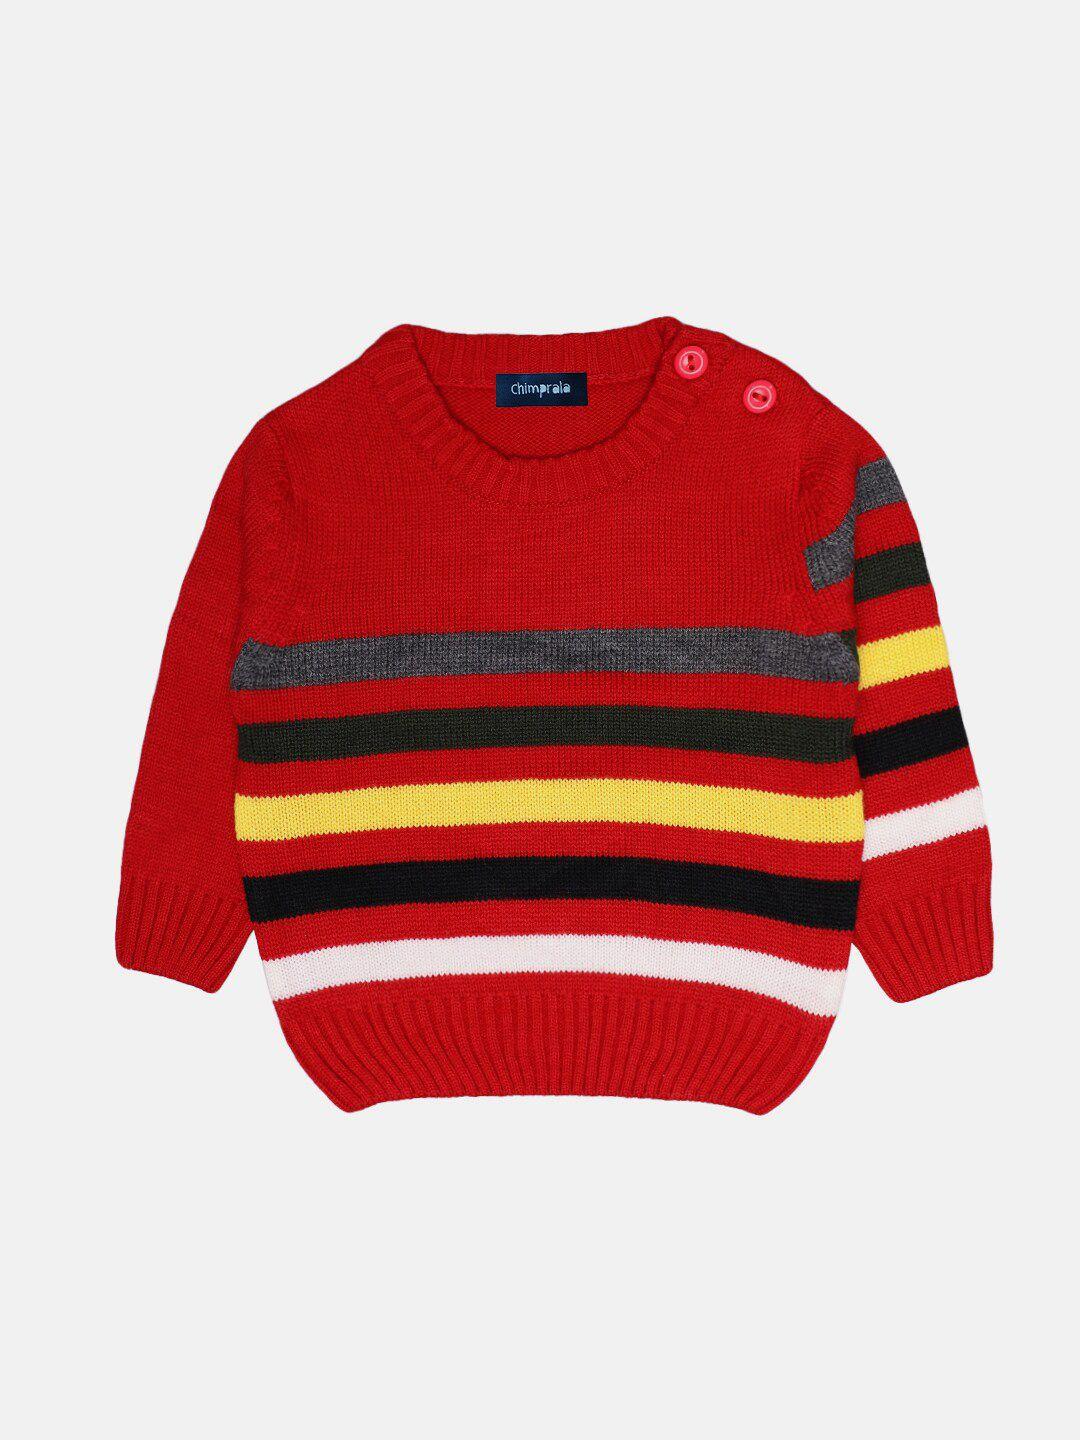 chimprala boys red & yellow striped pullover